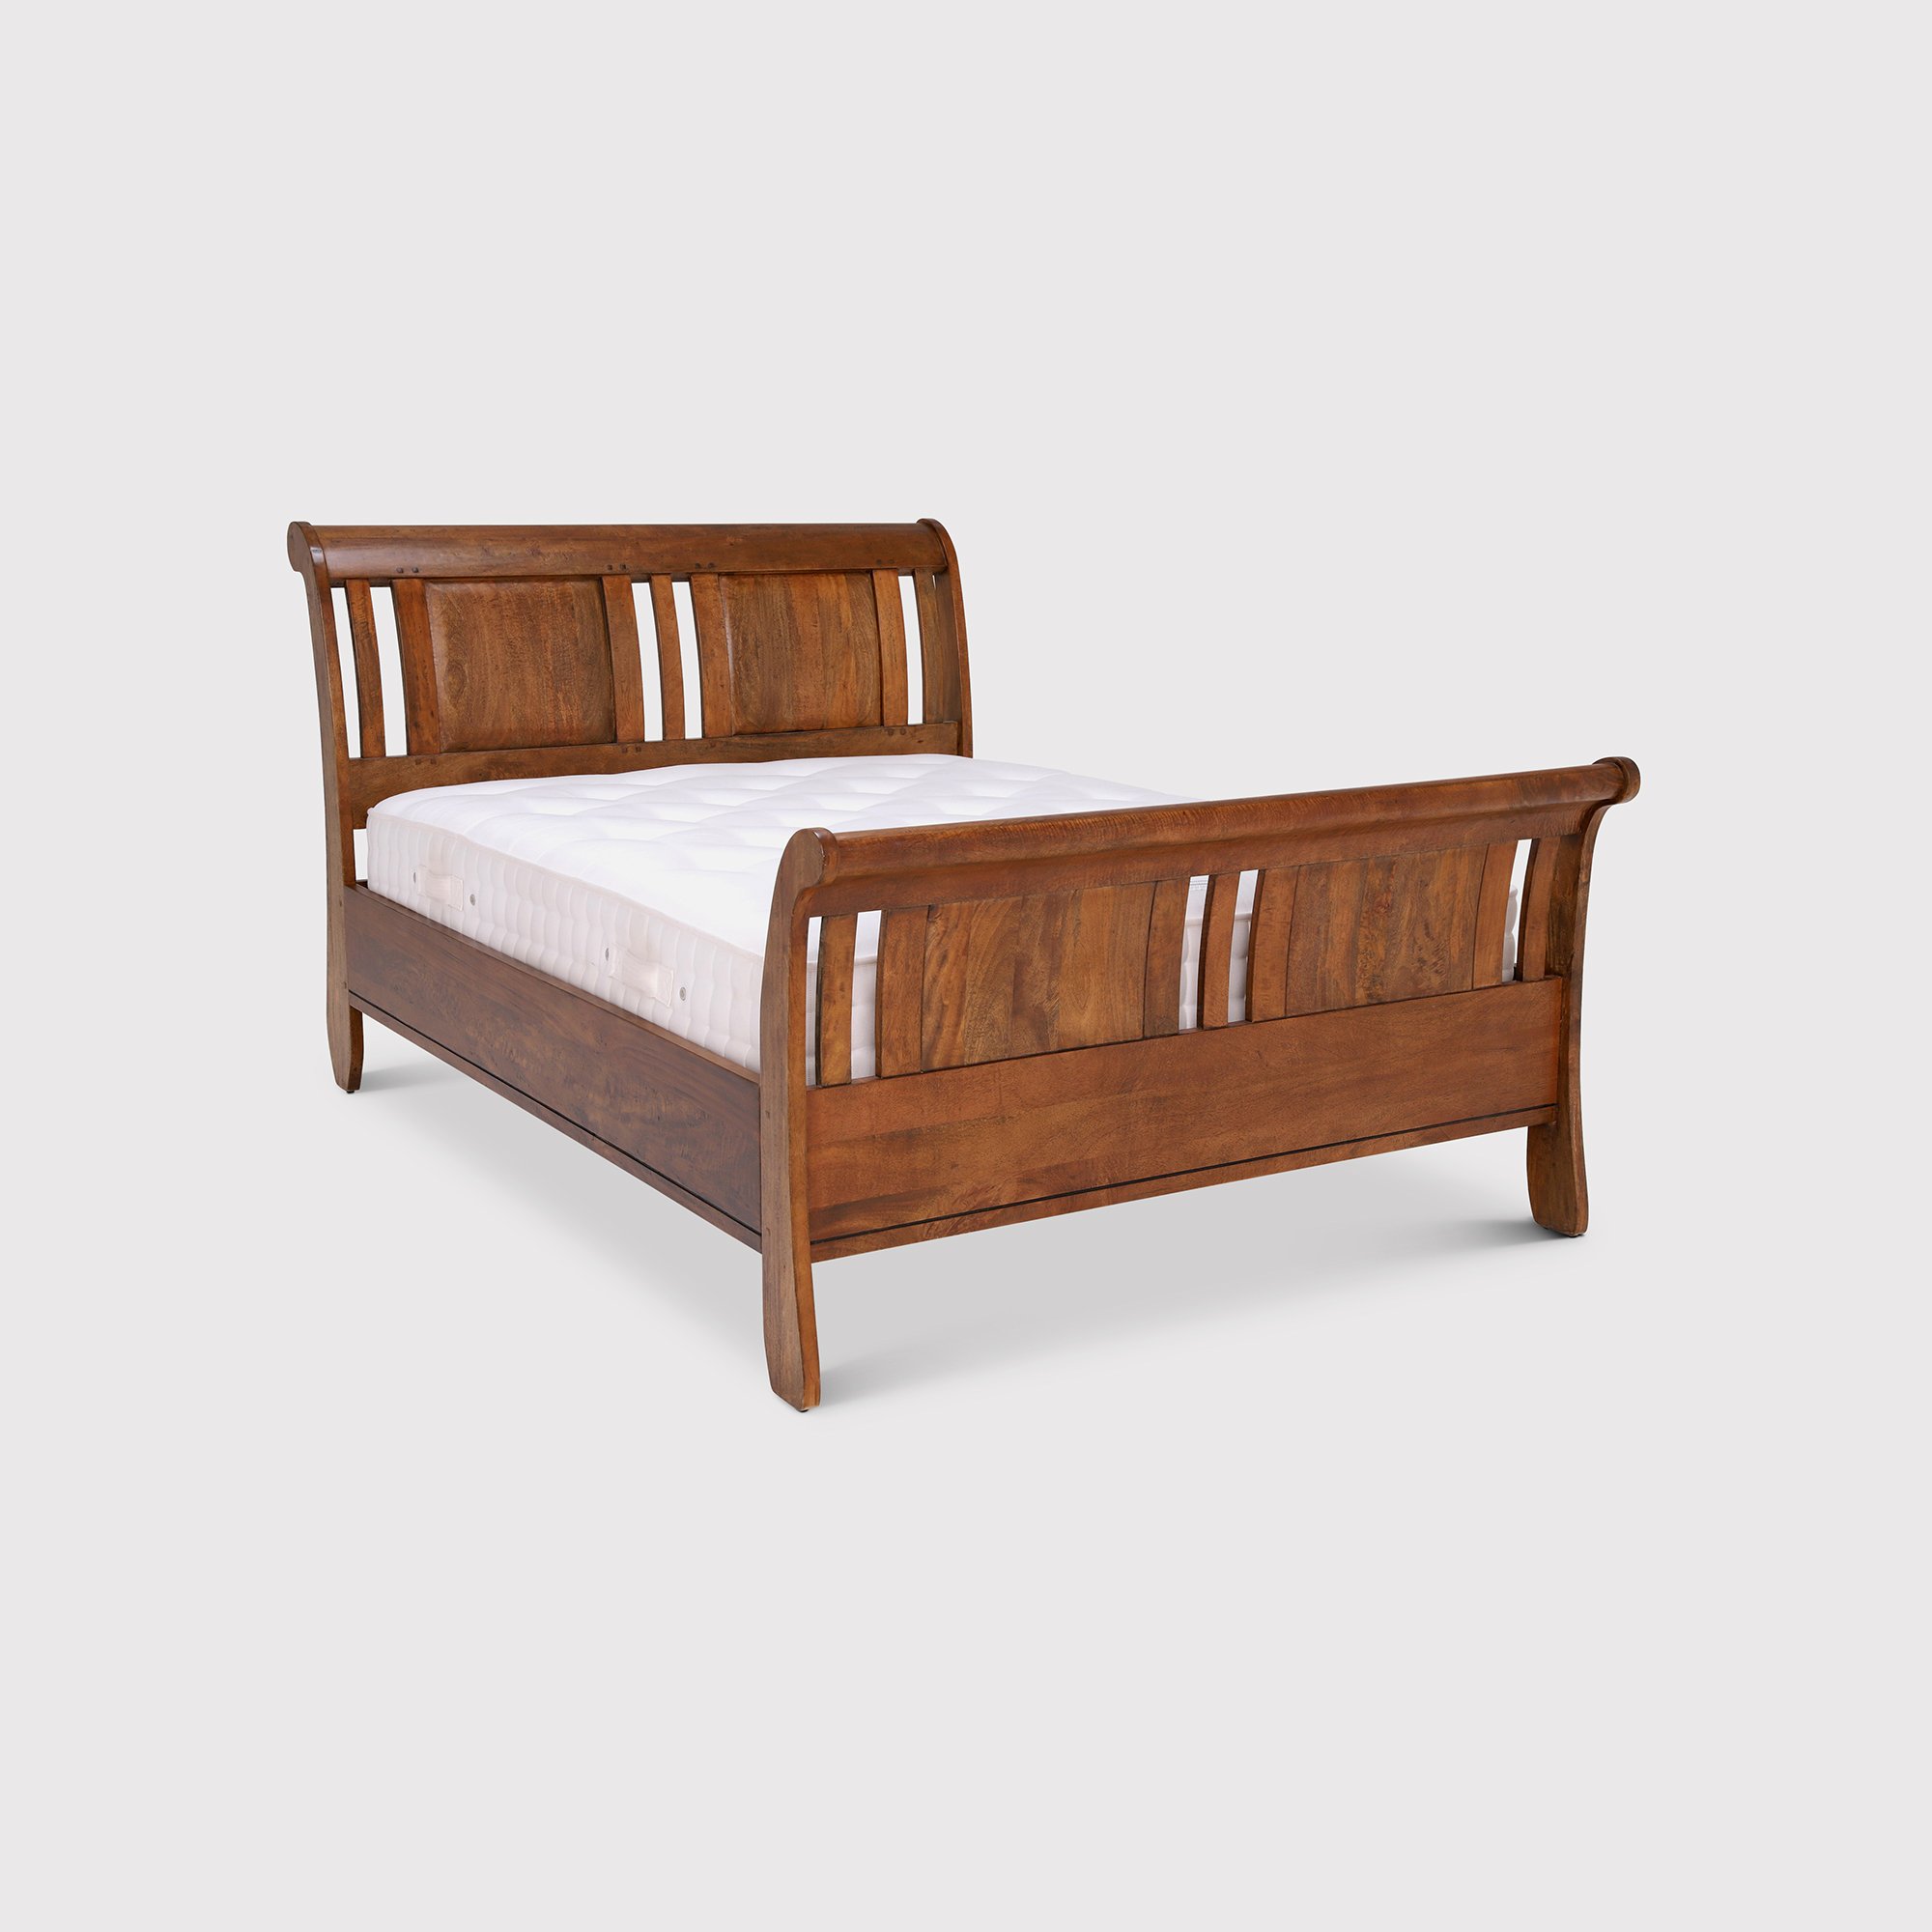 New Frontier 150cm Sleigh Bed, Wood | King | Barker & Stonehouse